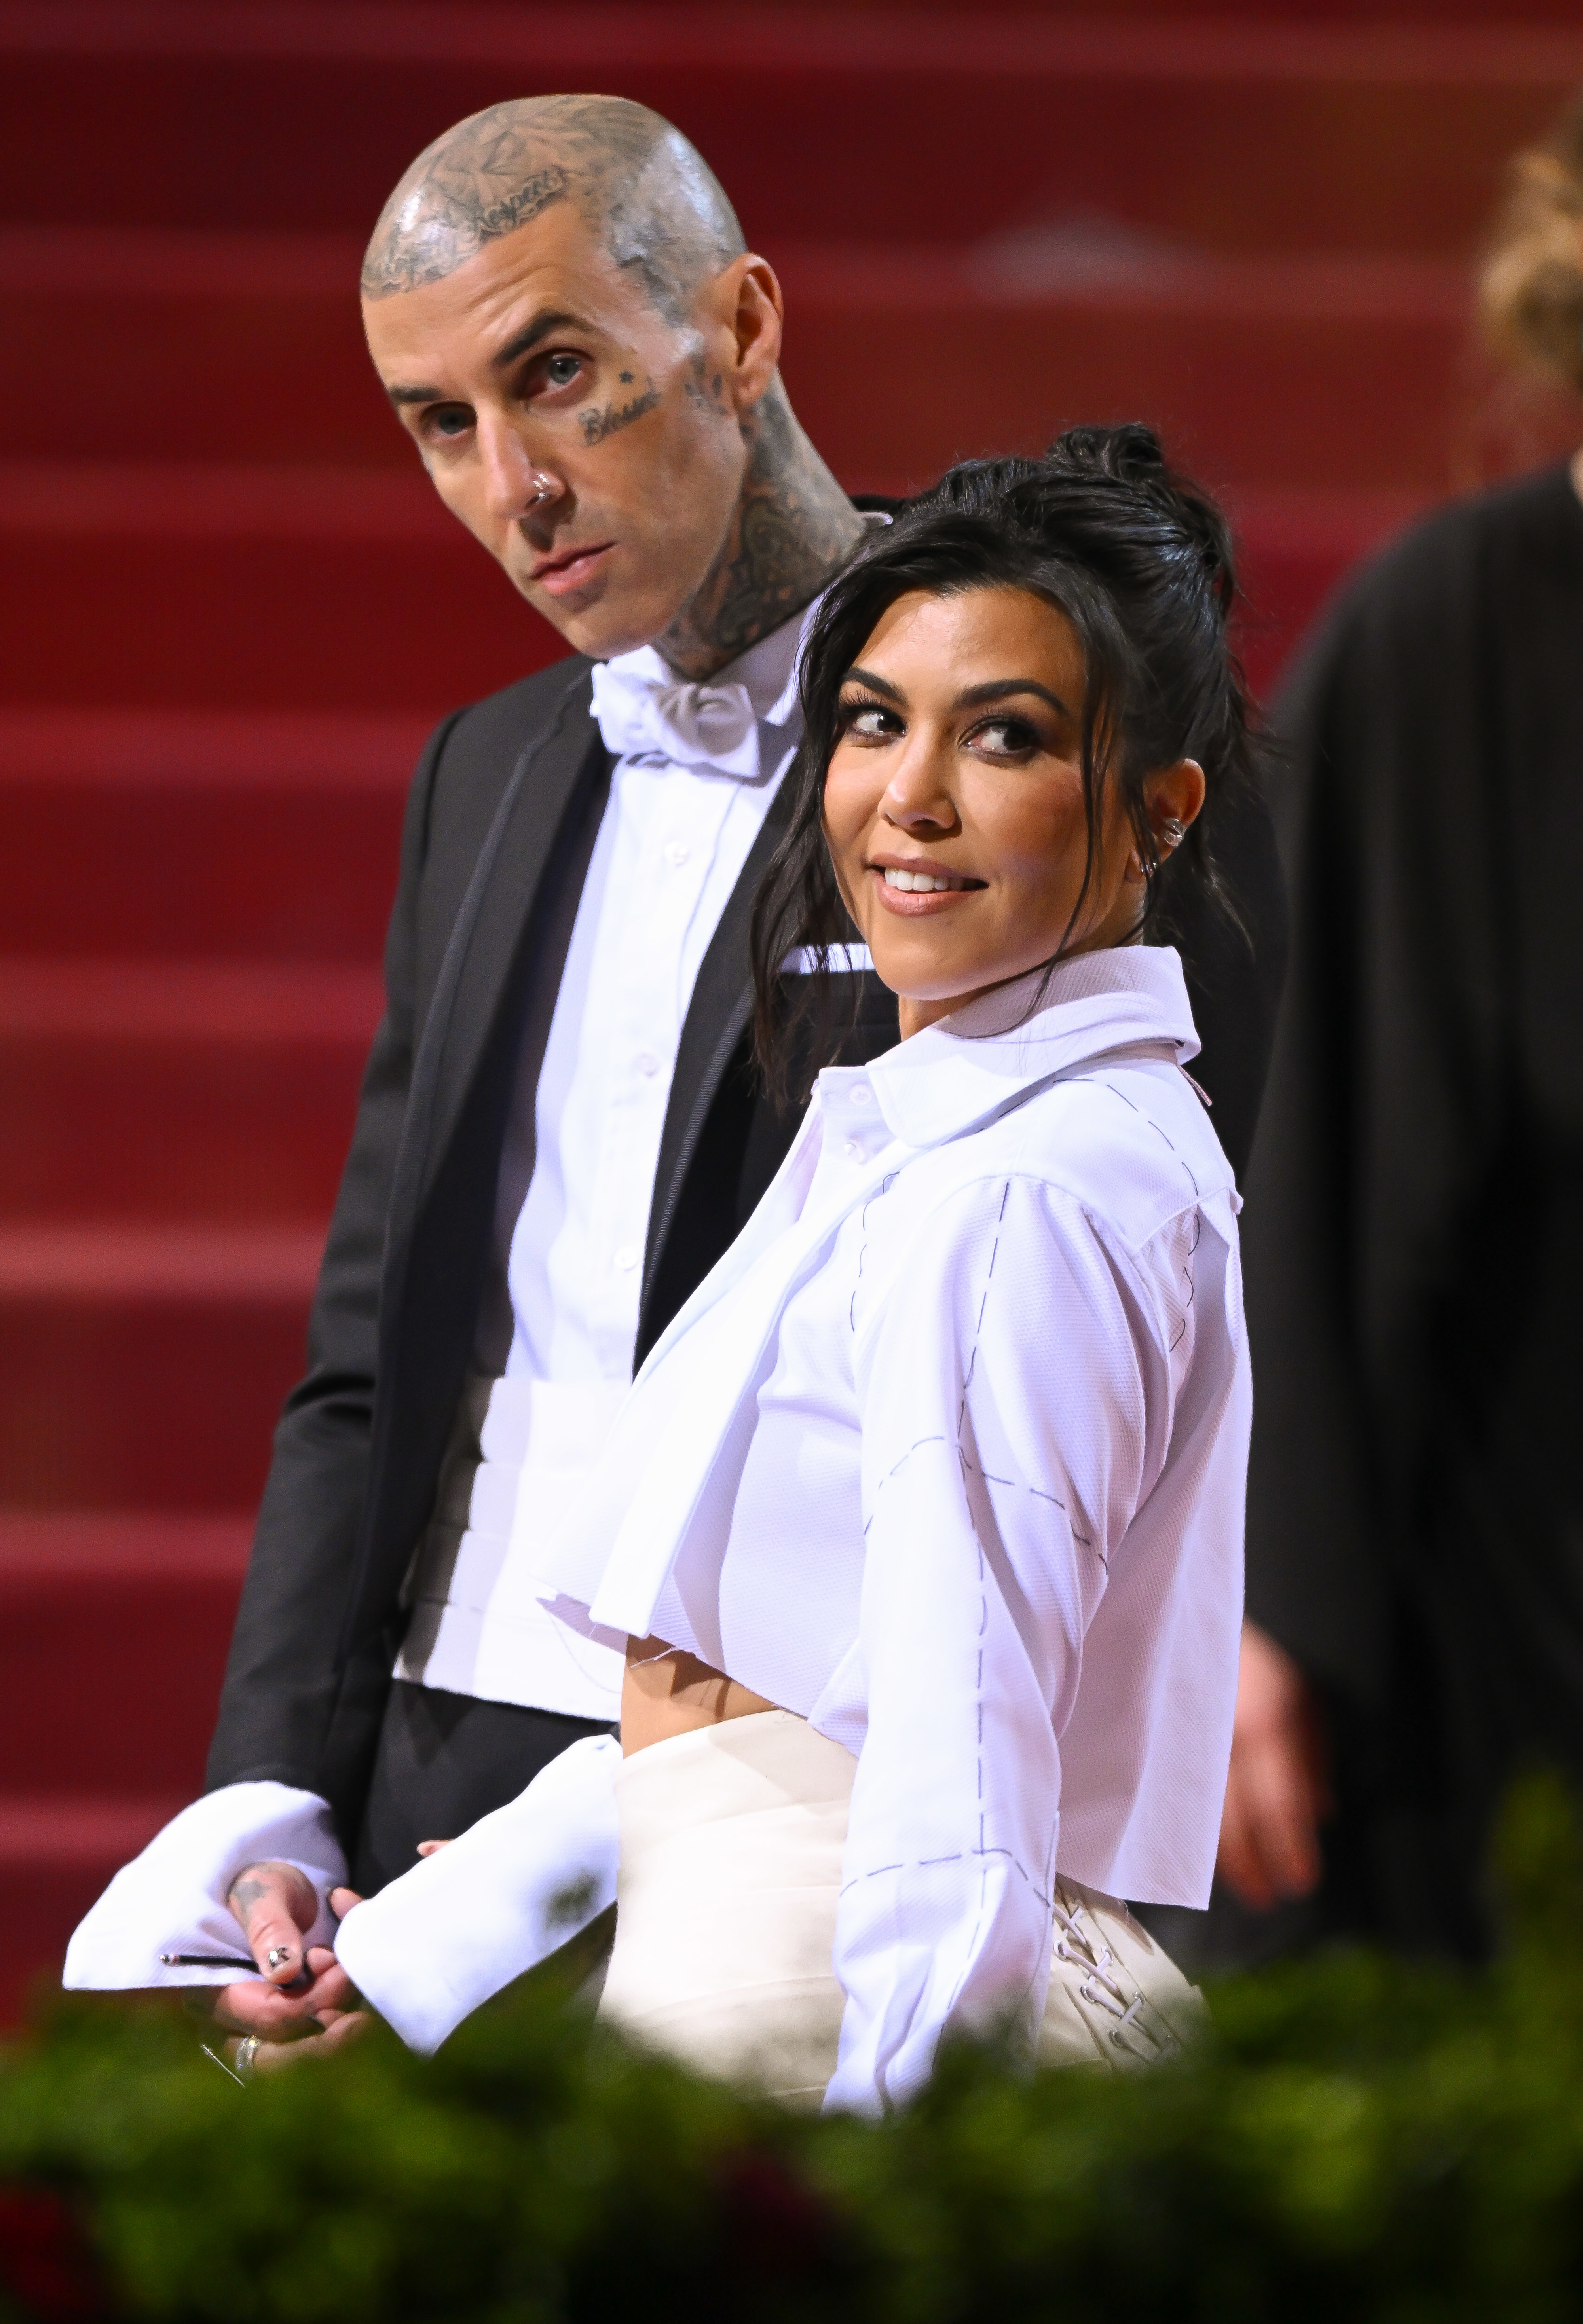 Two people at an event, one in a black tuxedo, the other in a white shirt and gloves